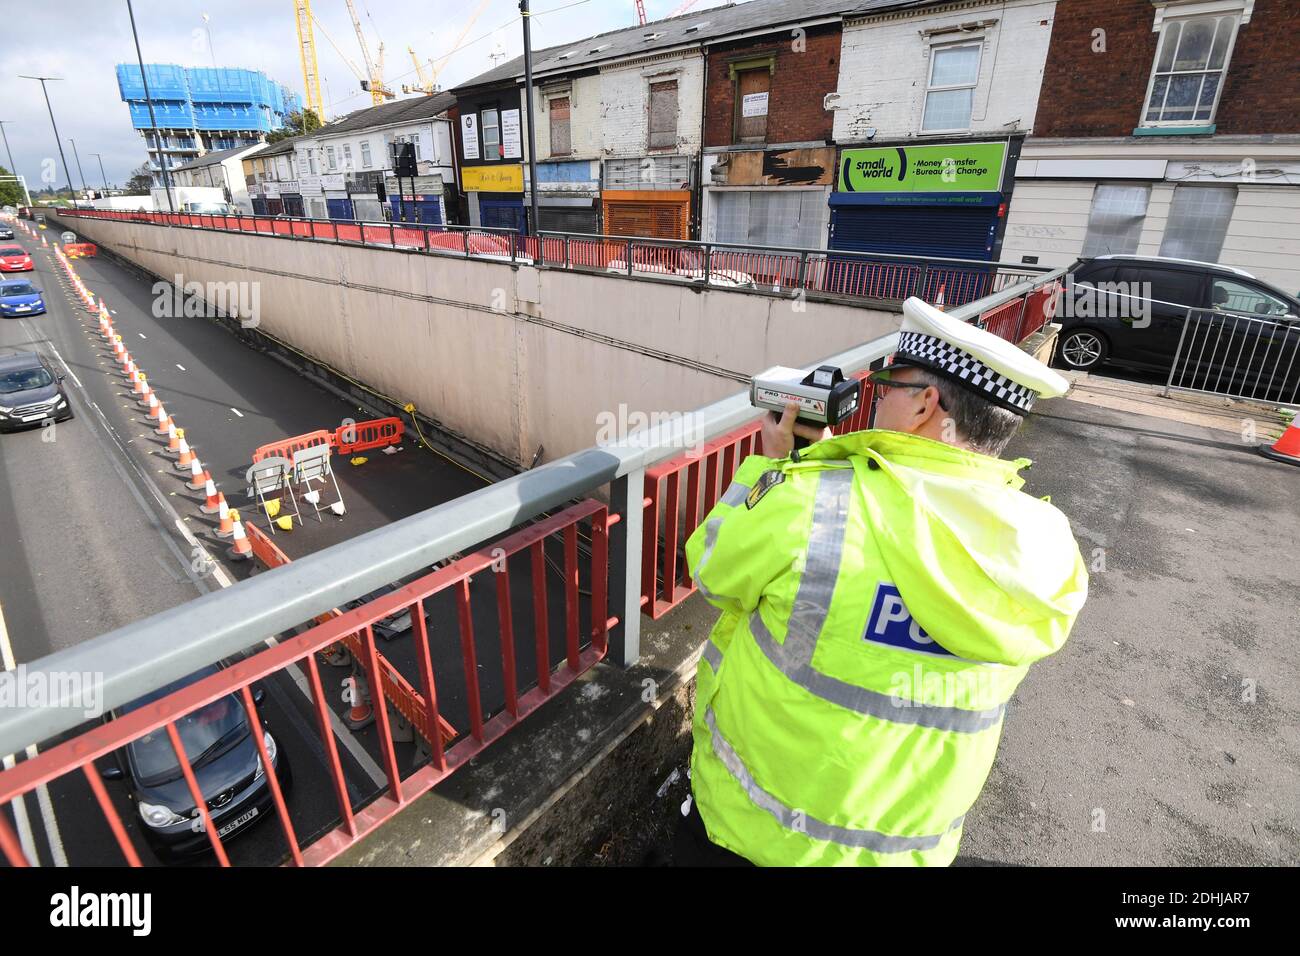 Police traffic officer holding speed checks over the A34 underpass as transport bosses have launched a clampdown on speeding motorists through 20mph road works on Aldridge Road and A34 junctions to make way for major regeneration. Officers from West Midlands Police will be holding regular speed checks as working contractors carryout construction around the Perry Barr area, Birmingham, The Midlands, England. Stock Photo